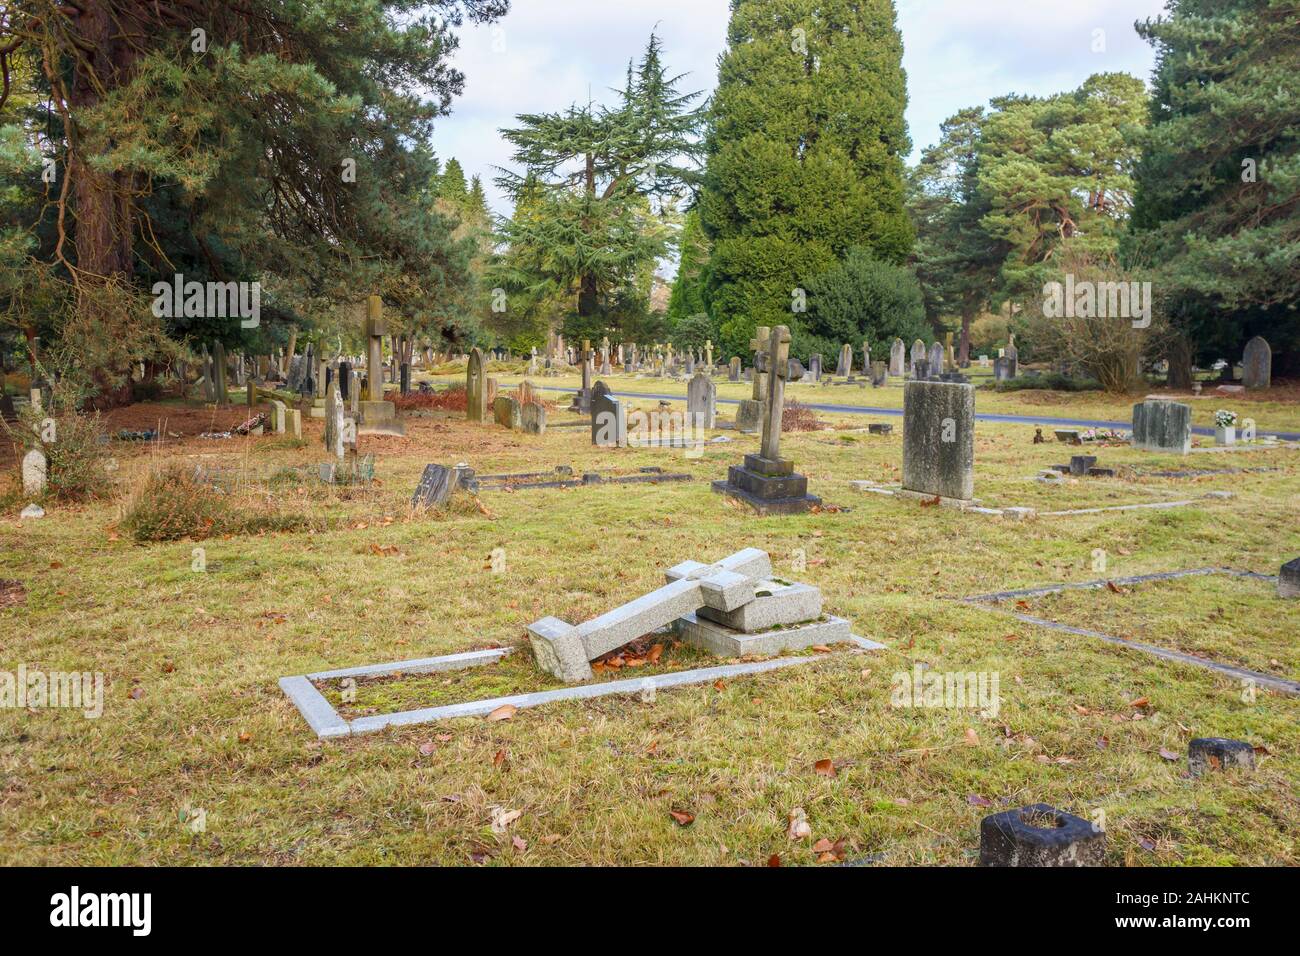 View of South Cemetery and old gravestones and memorials, Brookwood Cemetery, Cemetery Pales, Brookwood, Woking, Surrey, southeast England, UK Stock Photo